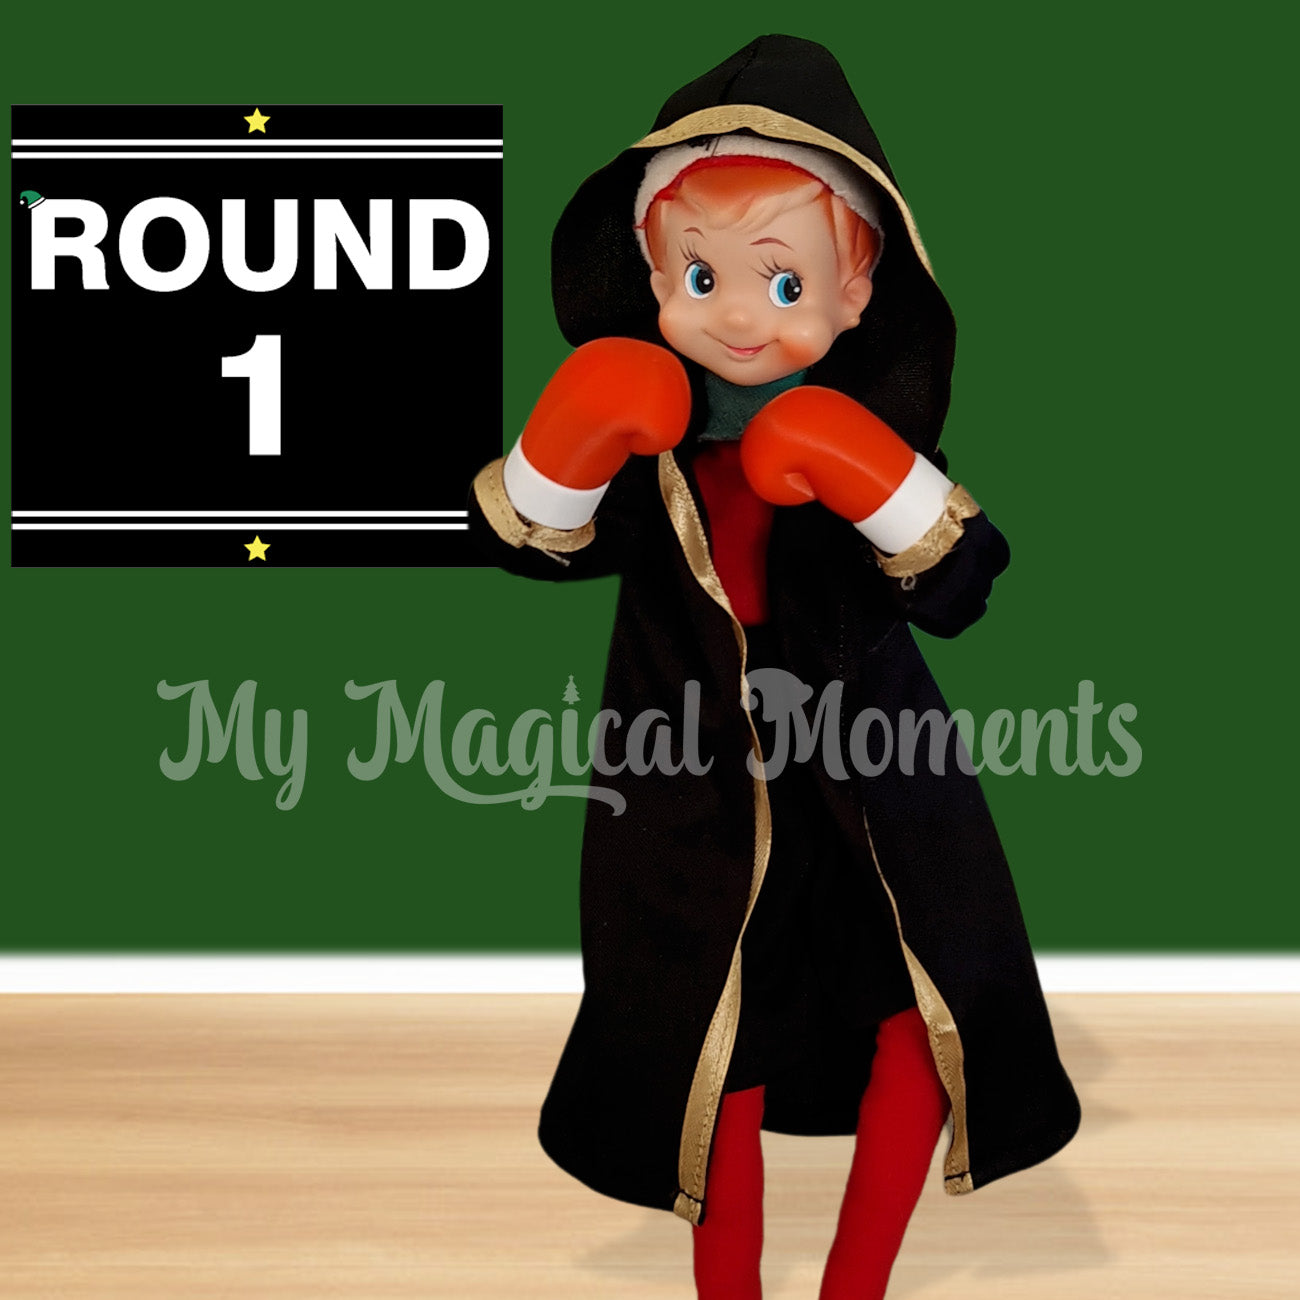 Elf dressed in a boxing outfit with a round one sign